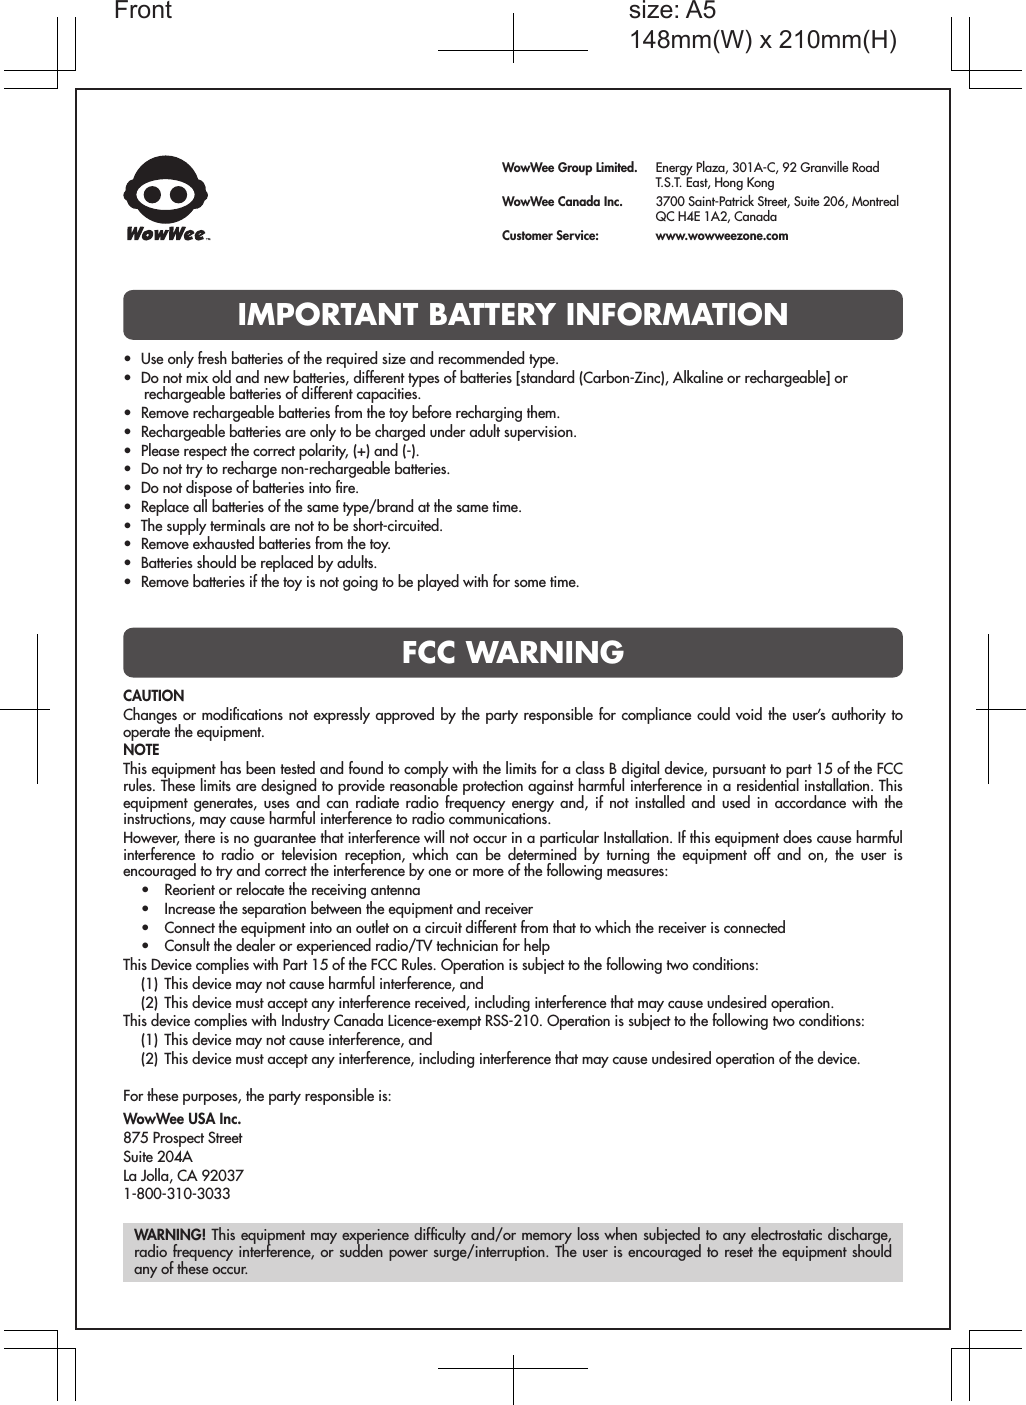 IMPORTANT BATTERY INFORMATIONFCC WARNINGWowWee Group Limited.  Energy Plaza, 301A-C, 92 Granville Road  T.S.T. East, Hong KongWowWee Canada Inc.  3700 Saint-Patrick Street, Suite 206, Montreal  QC H4E 1A2, CanadaCustomer Service:   www.wowweezone.comCAUTIONChanges or modiﬁcations not expressly approved by the party responsible for compliance could void the user’s authority to operate the equipment.NOTEThis equipment has been tested and found to comply with the limits for a class B digital device, pursuant to part 15 of the FCC rules. These limits are designed to provide reasonable protection against harmful interference in a residential installation. This equipment generates, uses and can radiate radio frequency energy and, if not installed and used in accordance with the instructions, may cause harmful interference to radio communications.However, there is no guarantee that interference will not occur in a particular Installation. If this equipment does cause harmful interference to radio or television reception, which can be determined by turning the equipment off and on, the user is encouraged to try and correct the interference by one or more of the following measures:•  Reorient or relocate the receiving antenna•  Increase the separation between the equipment and receiver•  Connect the equipment into an outlet on a circuit different from that to which the receiver is connected•  Consult the dealer or experienced radio/TV technician for helpThis Device complies with Part 15 of the FCC Rules. Operation is subject to the following two conditions:(1)  This device may not cause harmful interference, and(2)  This device must accept any interference received, including interference that may cause undesired operation.This device complies with Industry Canada Licence-exempt RSS-210. Operation is subject to the following two conditions:(1)  This device may not cause interference, and(2)  This device must accept any interference, including interference that may cause undesired operation of the device.For these purposes, the party responsible is:WowWee USA Inc.875 Prospect StreetSuite 204ALa Jolla, CA 920371-800-310-3033WARNING! This equipment may experience difﬁculty and/or memory loss when subjected to any electrostatic discharge, radio frequency interference, or sudden power surge/interruption. The user is encouraged to reset the equipment should any of these occur.•  Use only fresh batteries of the required size and recommended type.•  Do not mix old and new batteries, different types of batteries [standard (Carbon-Zinc), Alkaline or rechargeable] or rechargeable batteries of different capacities.•  Remove rechargeable batteries from the toy before recharging them.•  Rechargeable batteries are only to be charged under adult supervision.•  Please respect the correct polarity, (+) and (-).•  Do not try to recharge non-rechargeable batteries.•  Do not dispose of batteries into ﬁre.•  Replace all batteries of the same type/brand at the same time.•  The supply terminals are not to be short-circuited.•  Remove exhausted batteries from the toy.•  Batteries should be replaced by adults.•  Remove batteries if the toy is not going to be played with for some time.size: A5148mm(W) x 210mm(H)Front